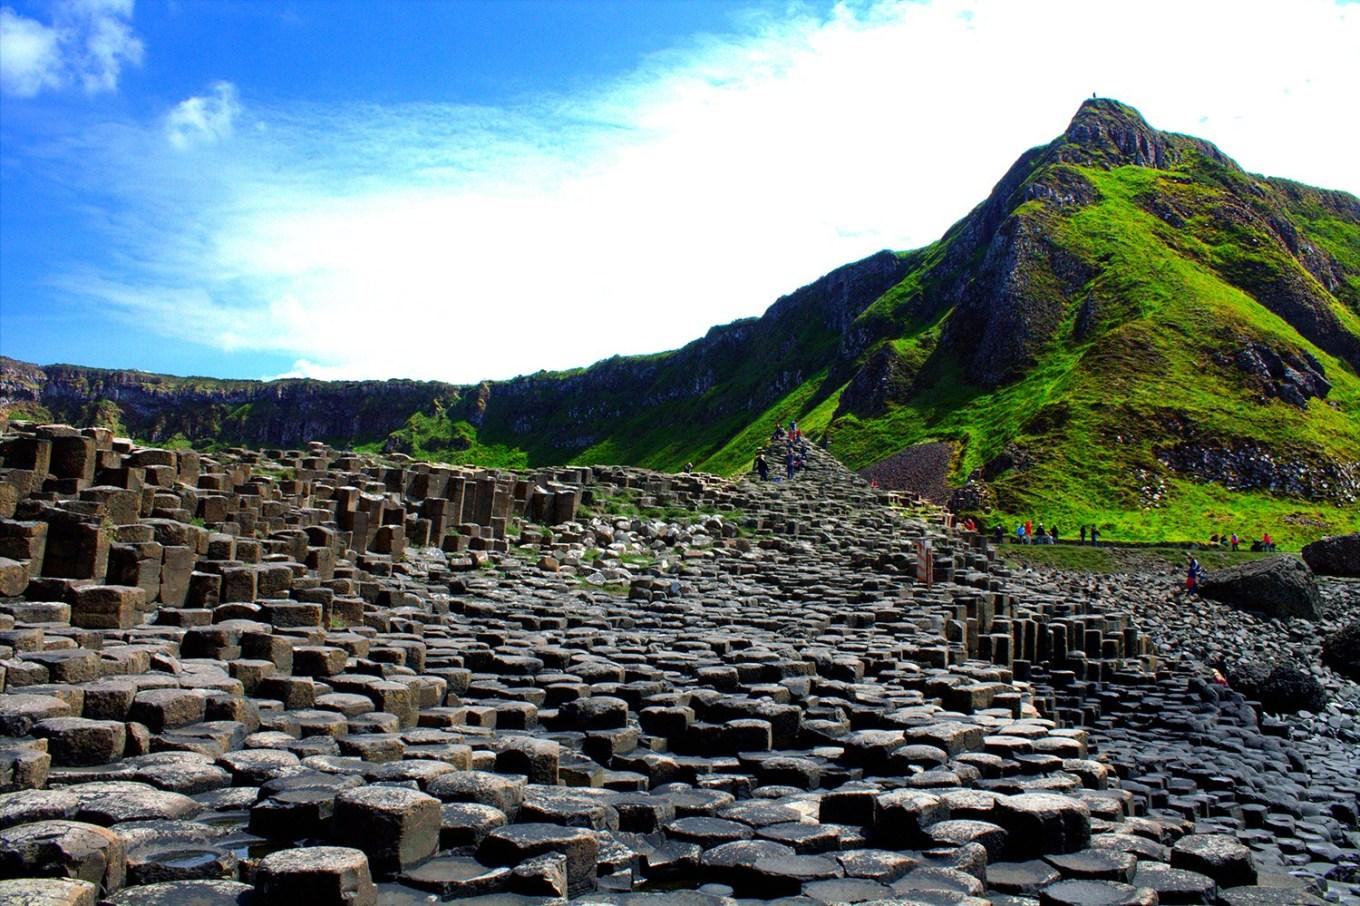 Mingling With Giants At The Giant's Causeway in Northern Ireland